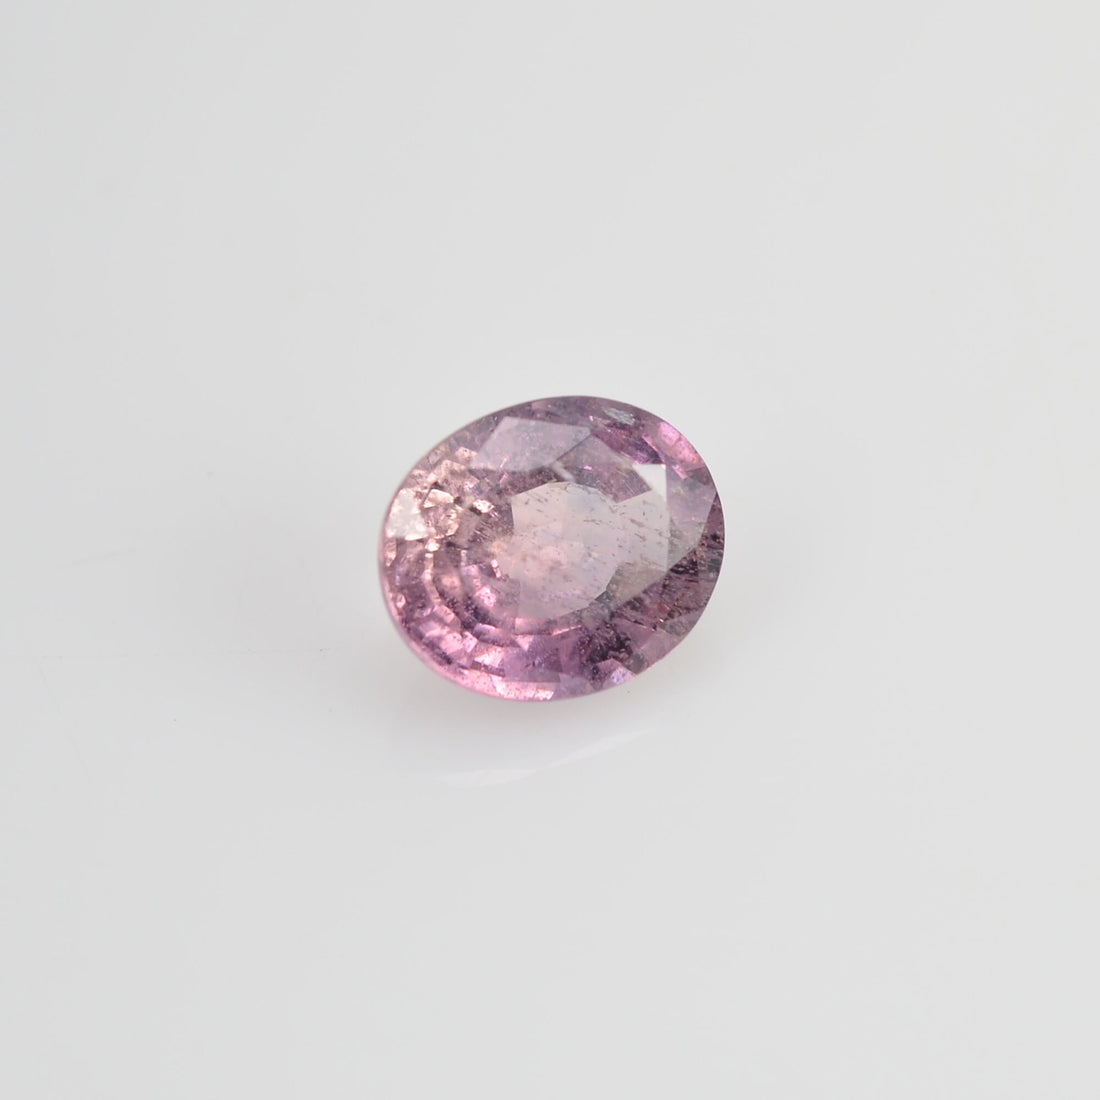 0.89 cts Natural Purple Sapphire Loose Gemstone Oval Cut